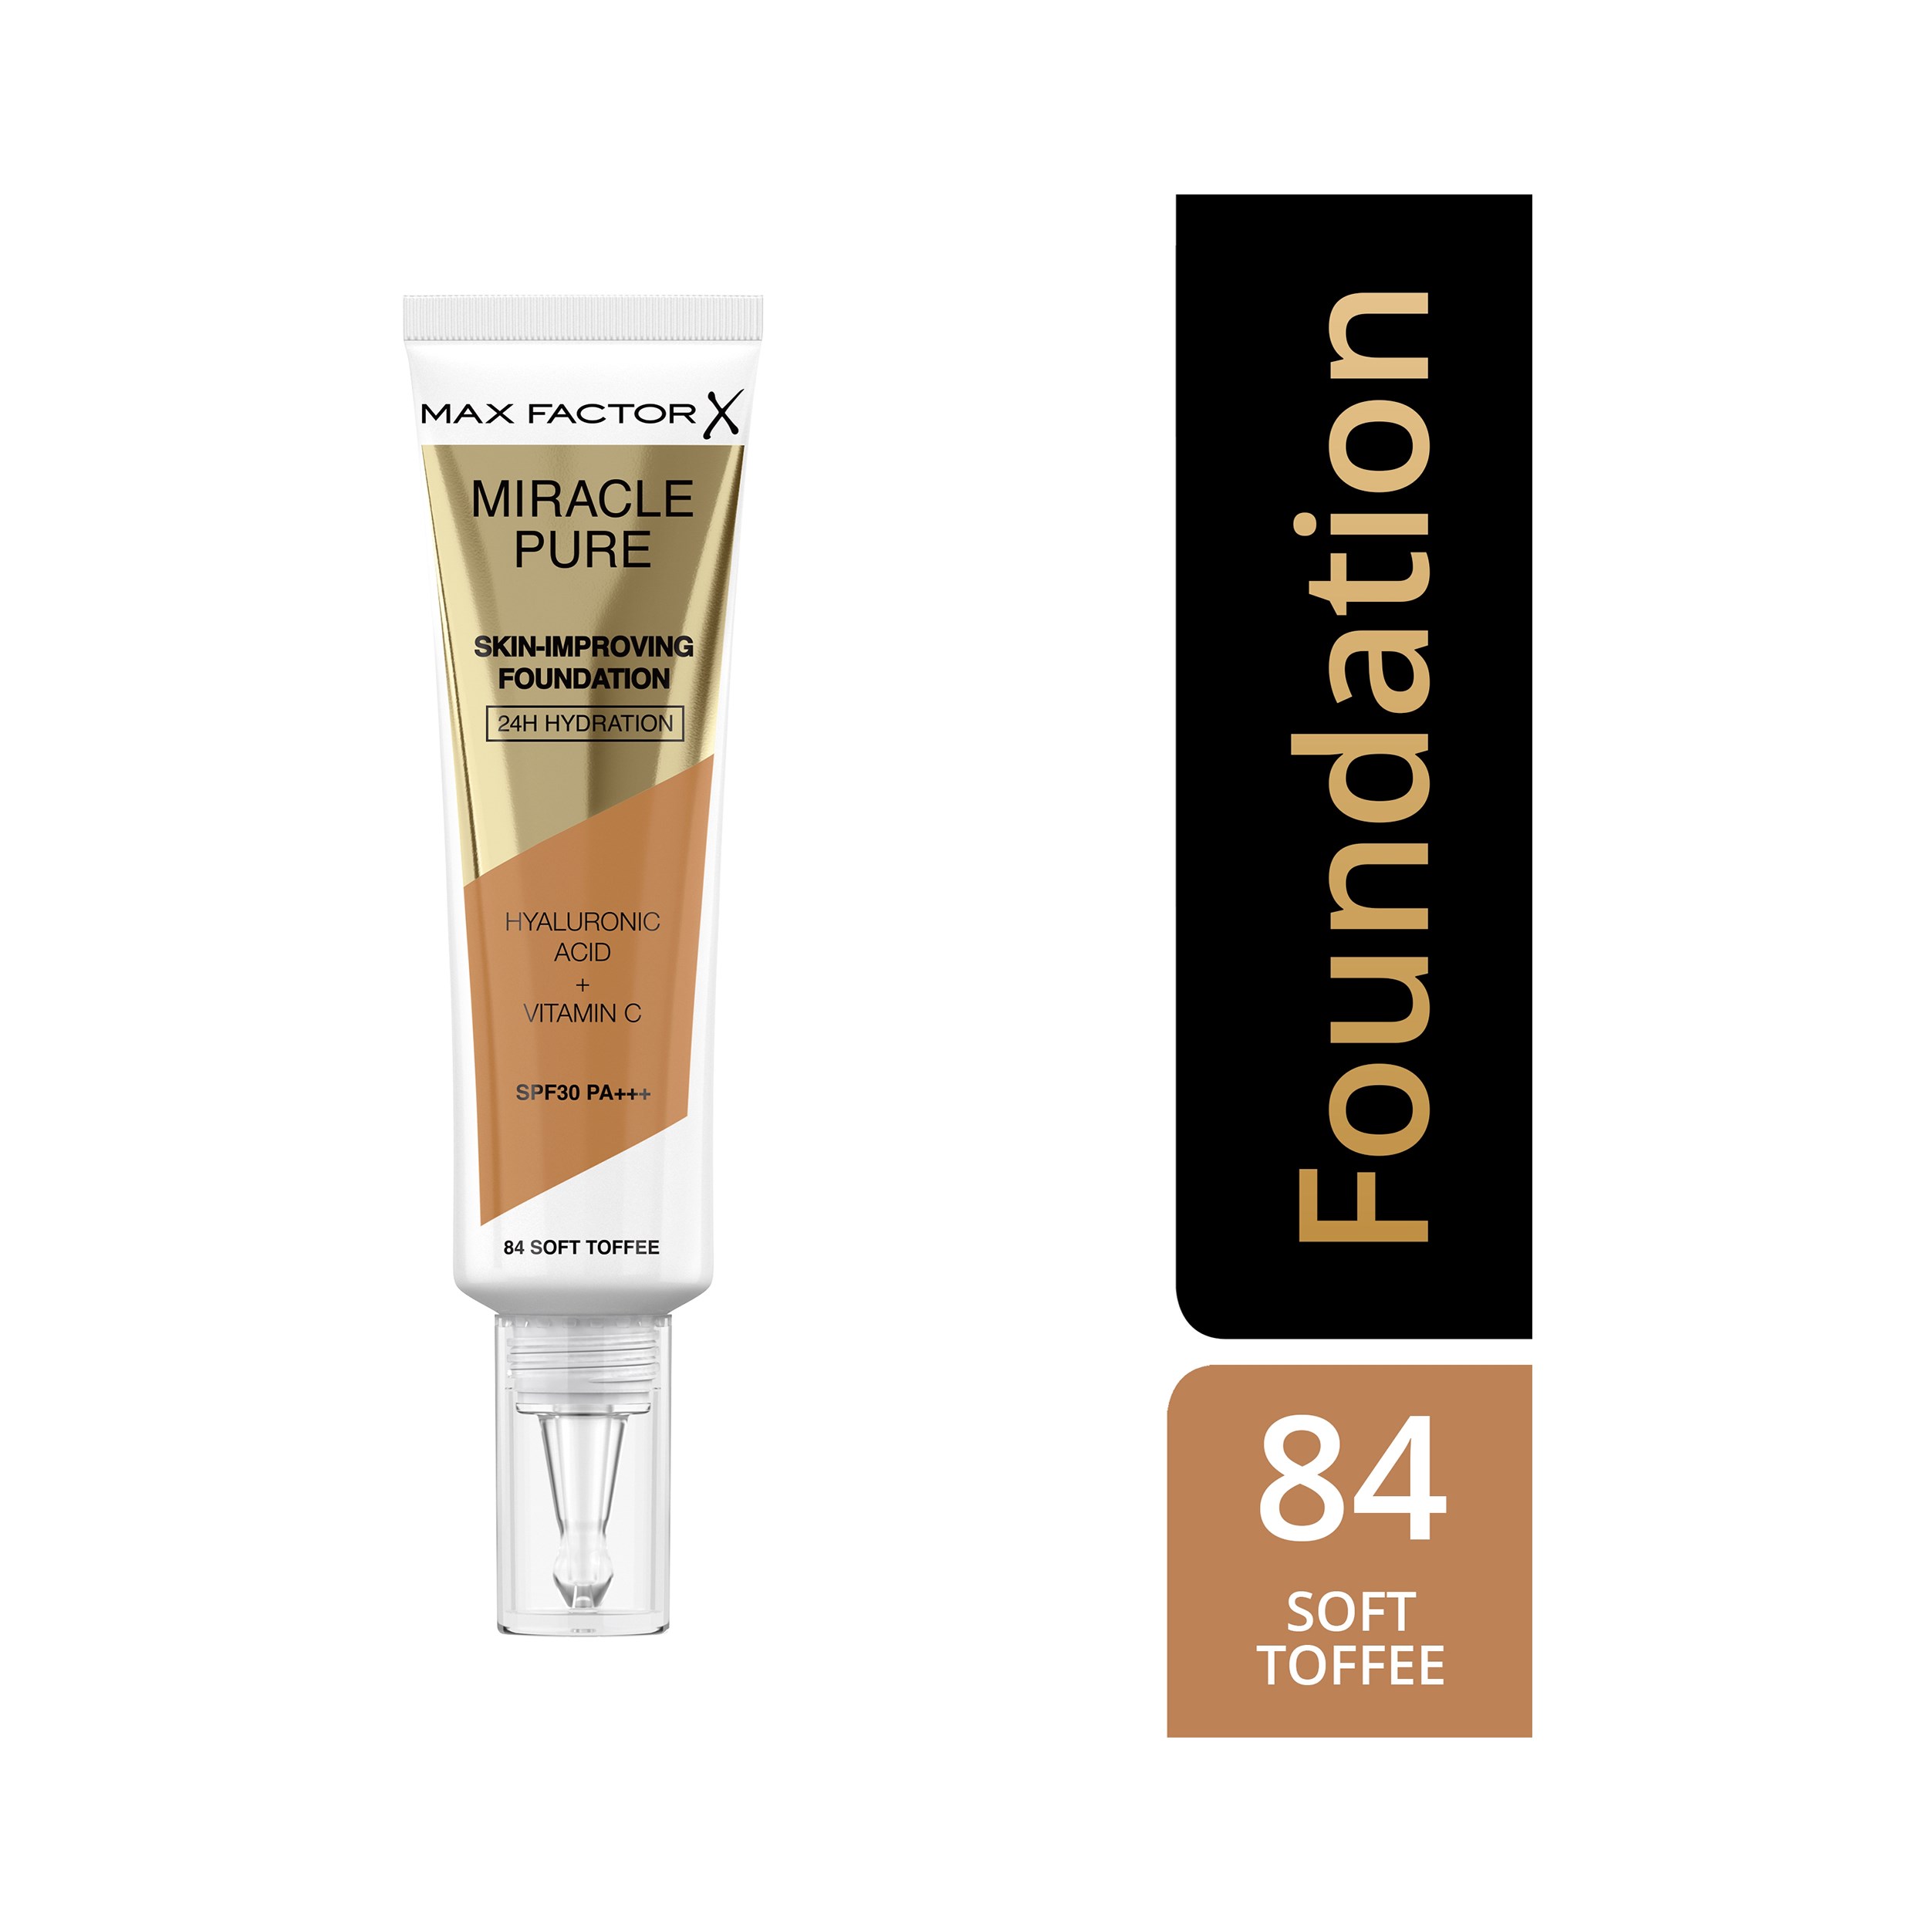 Läs mer om Max Factor Miracle Pure Skin-Improving Foundation 84 Soft Toffee